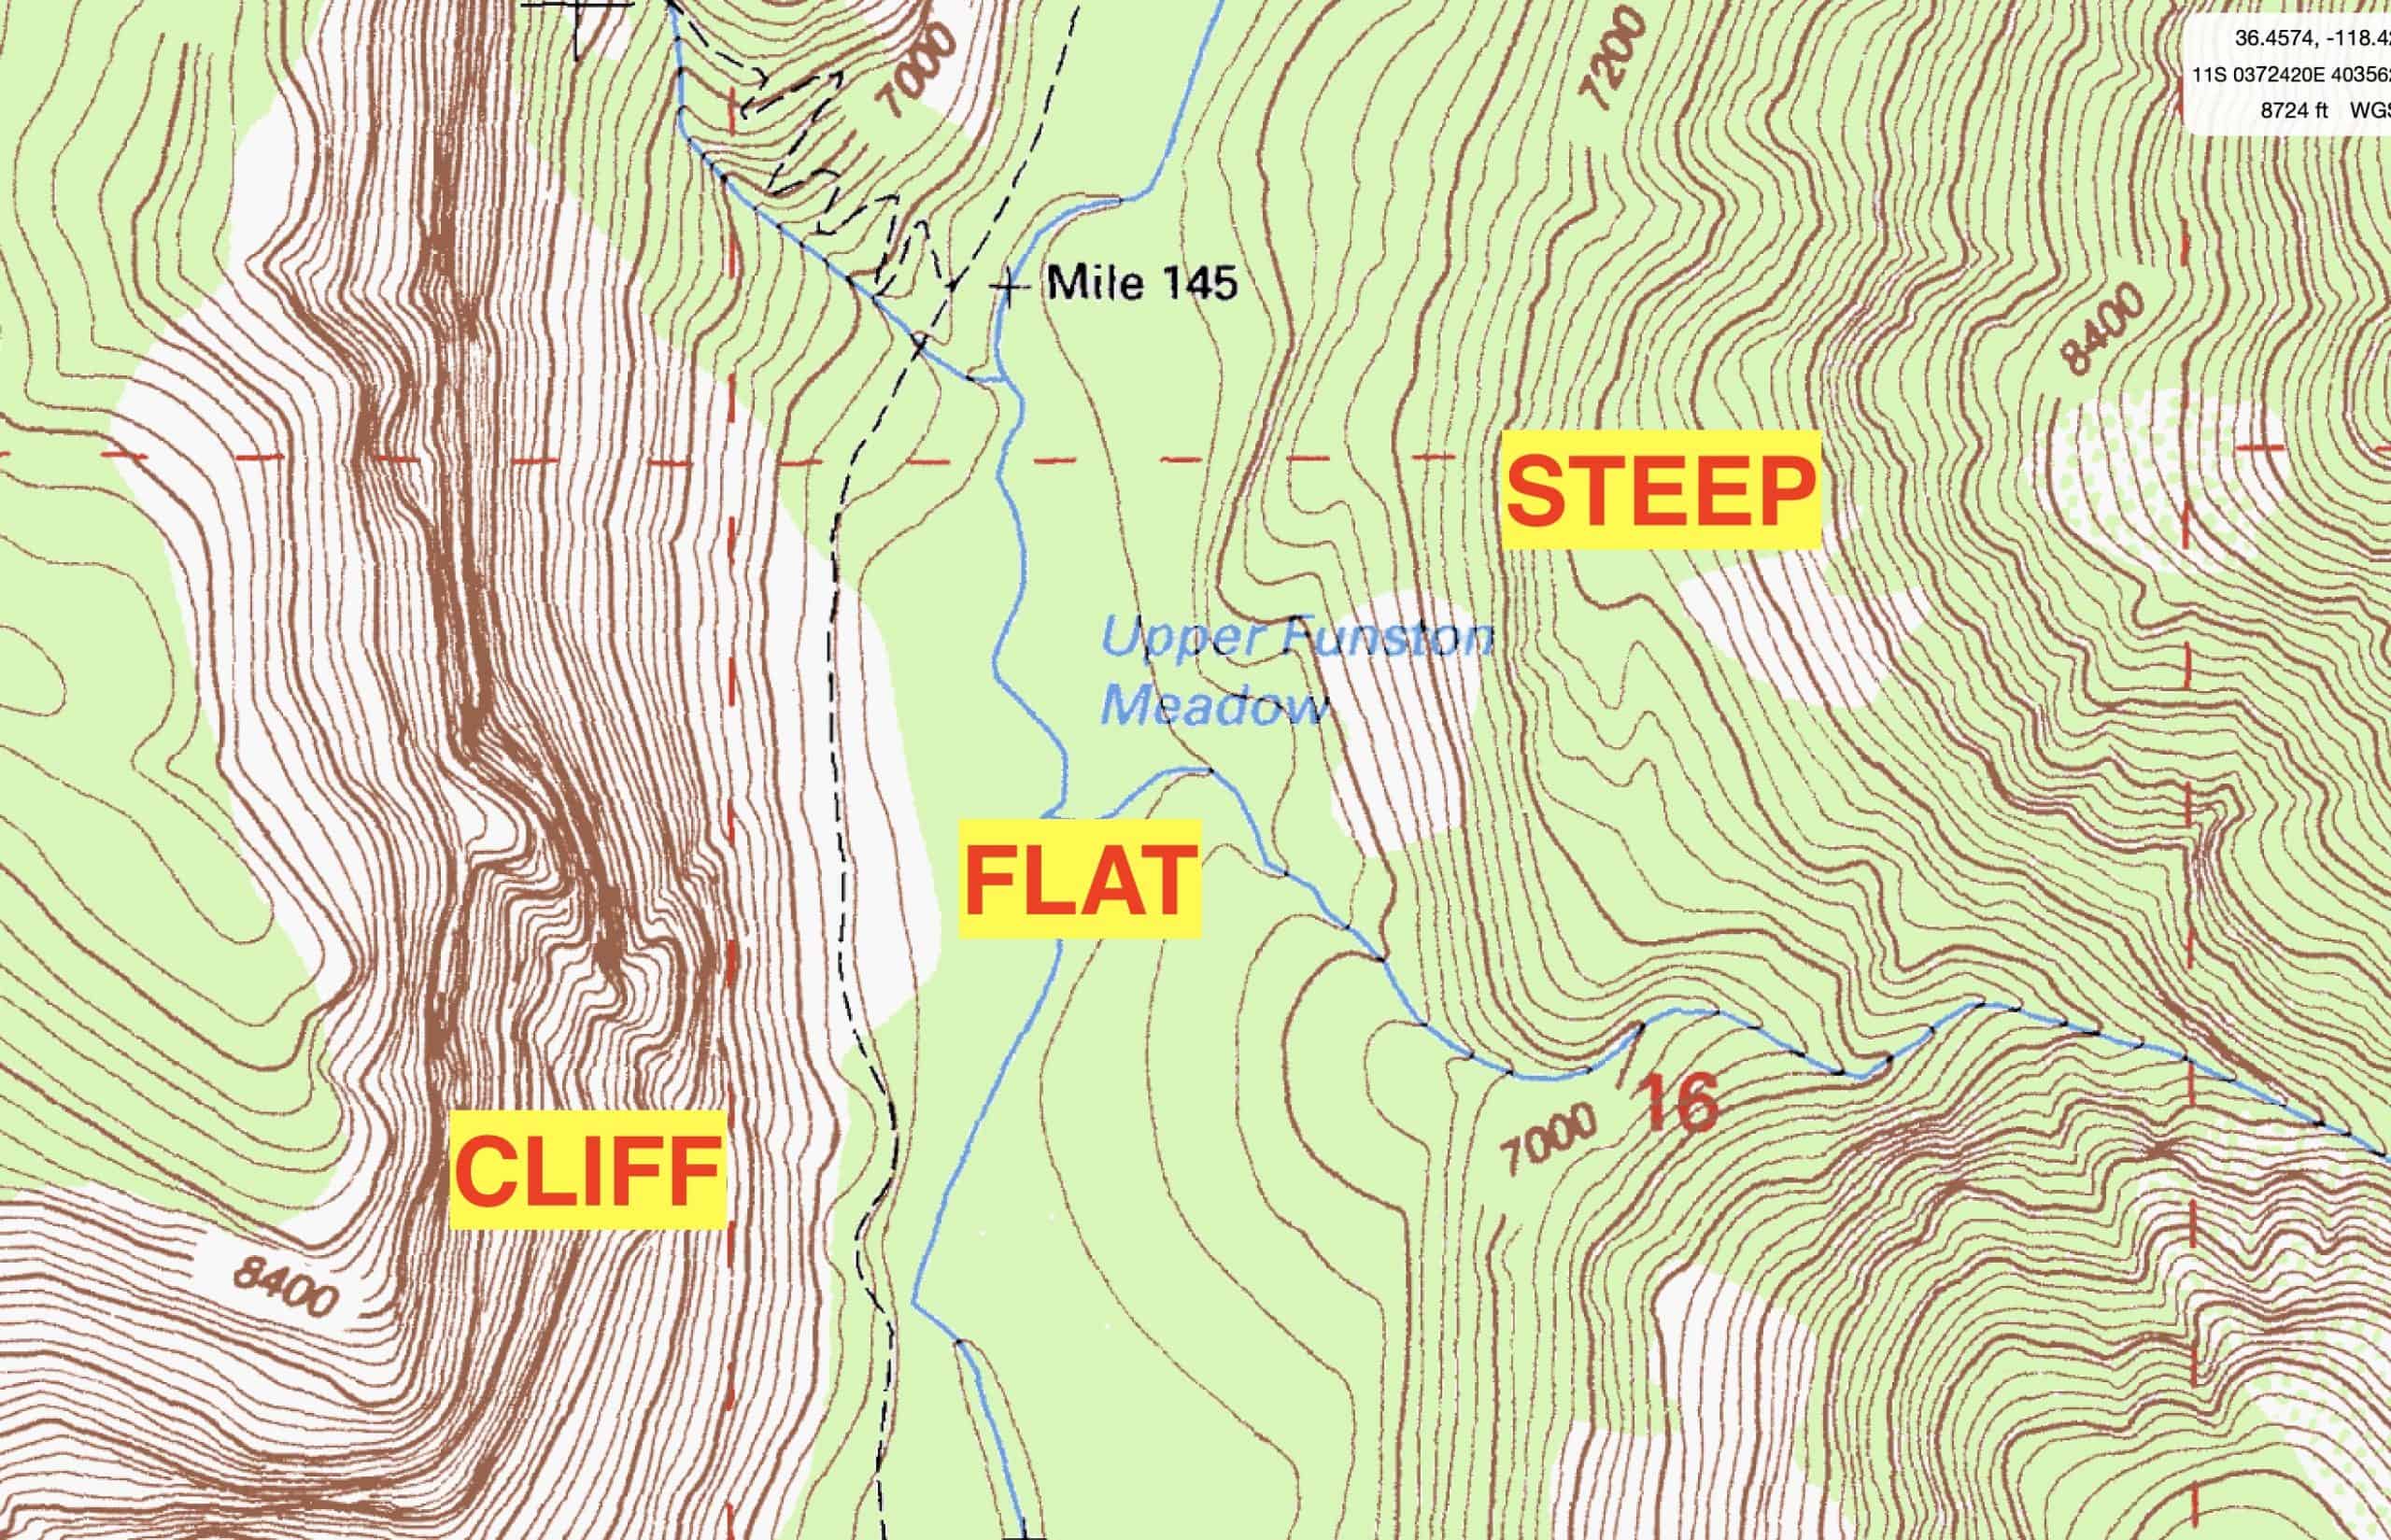 elevation label on a topographic map